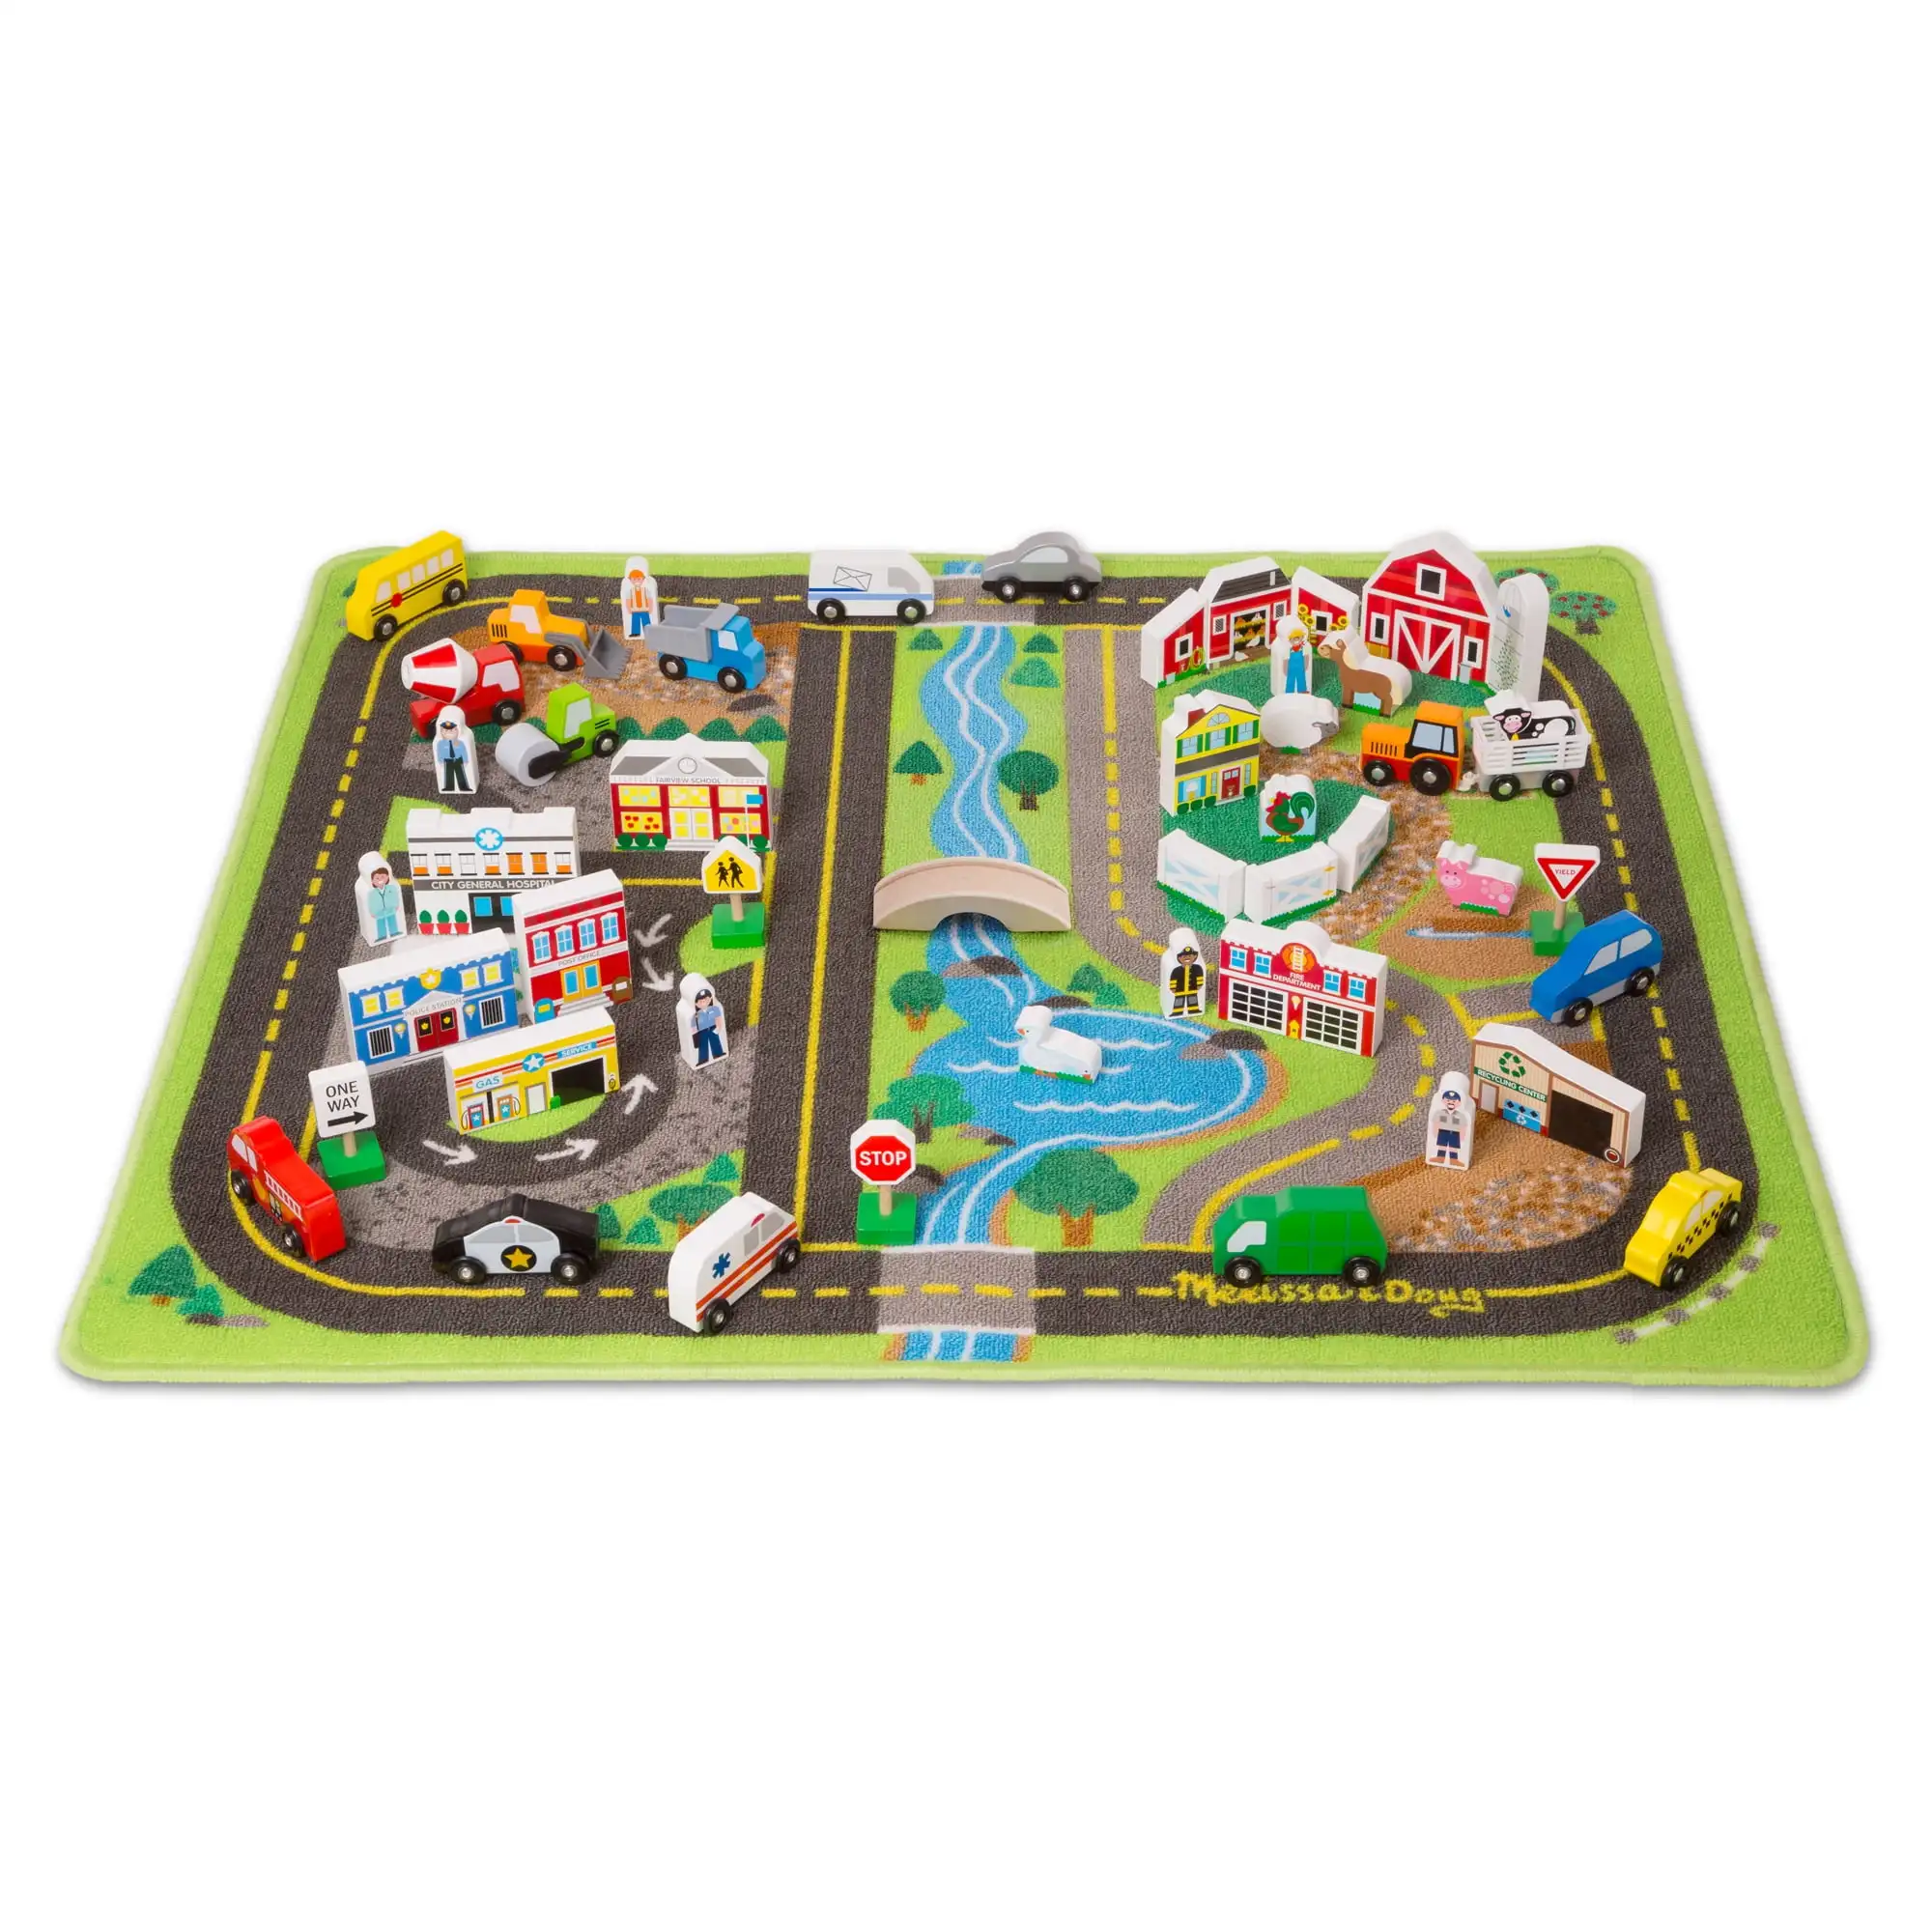 

Deluxe Activity Road Rug Play Set with 49 Wooden Vehicles and Play Pieces